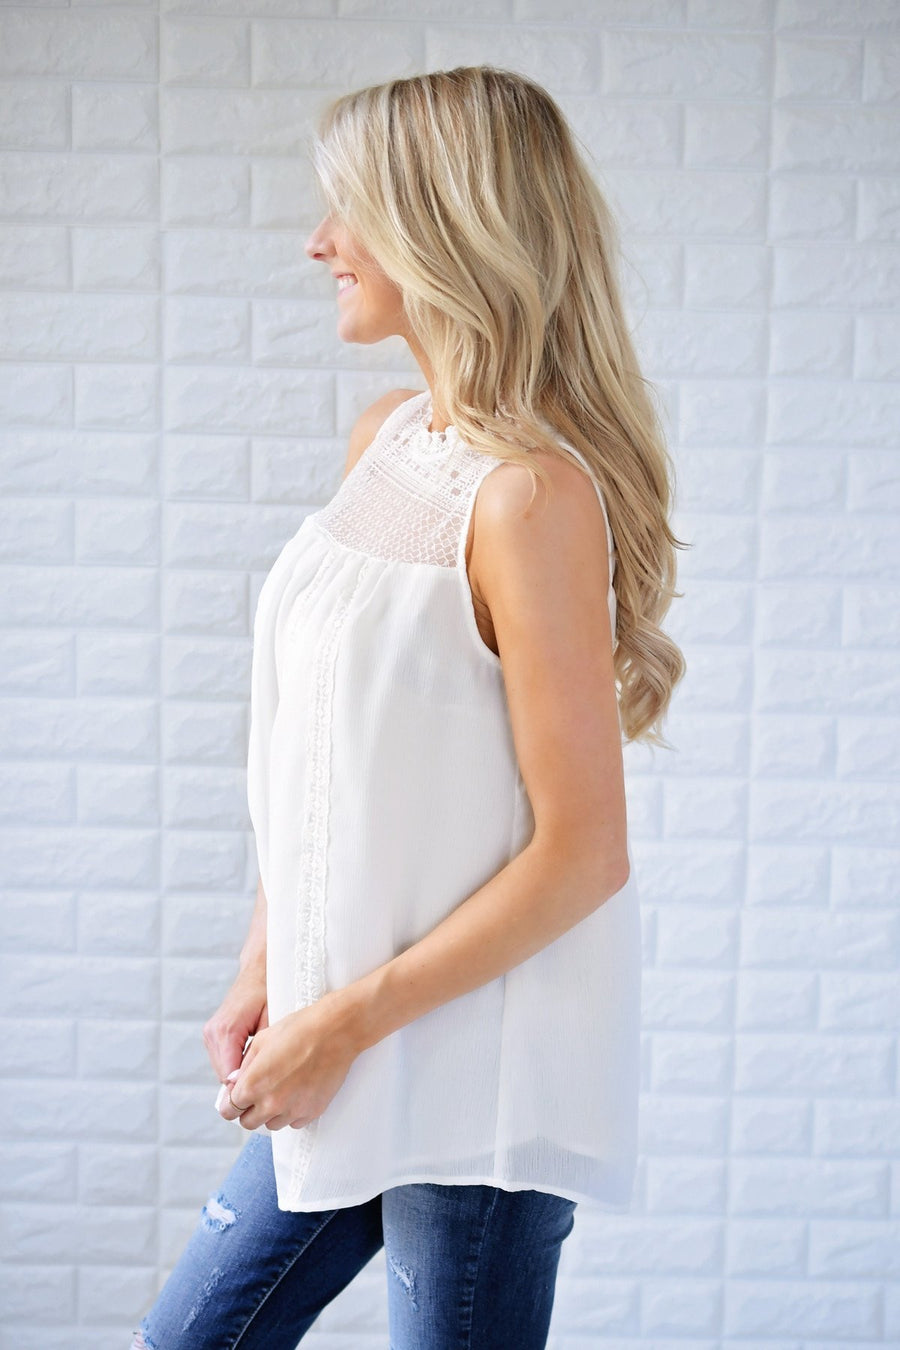 White Lace Tank Top – The Pulse Boutique